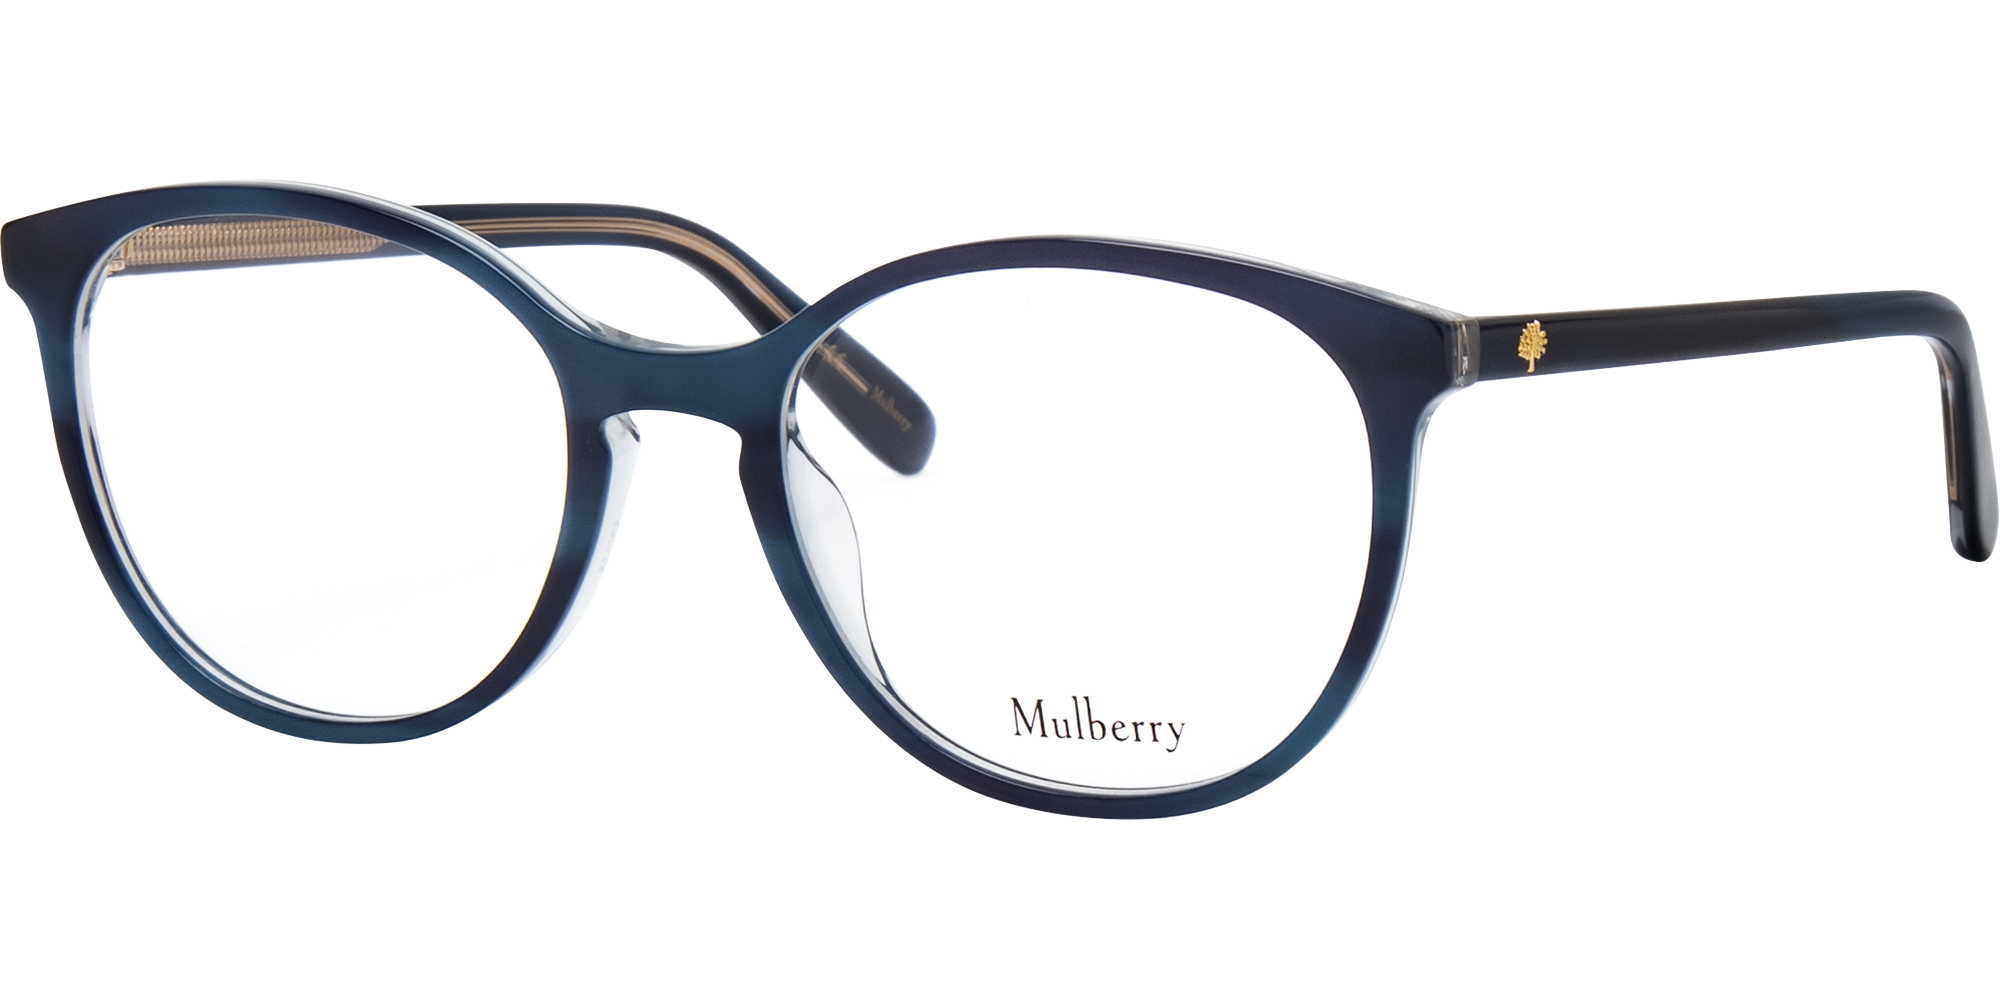 Mulberry VML130 image number null